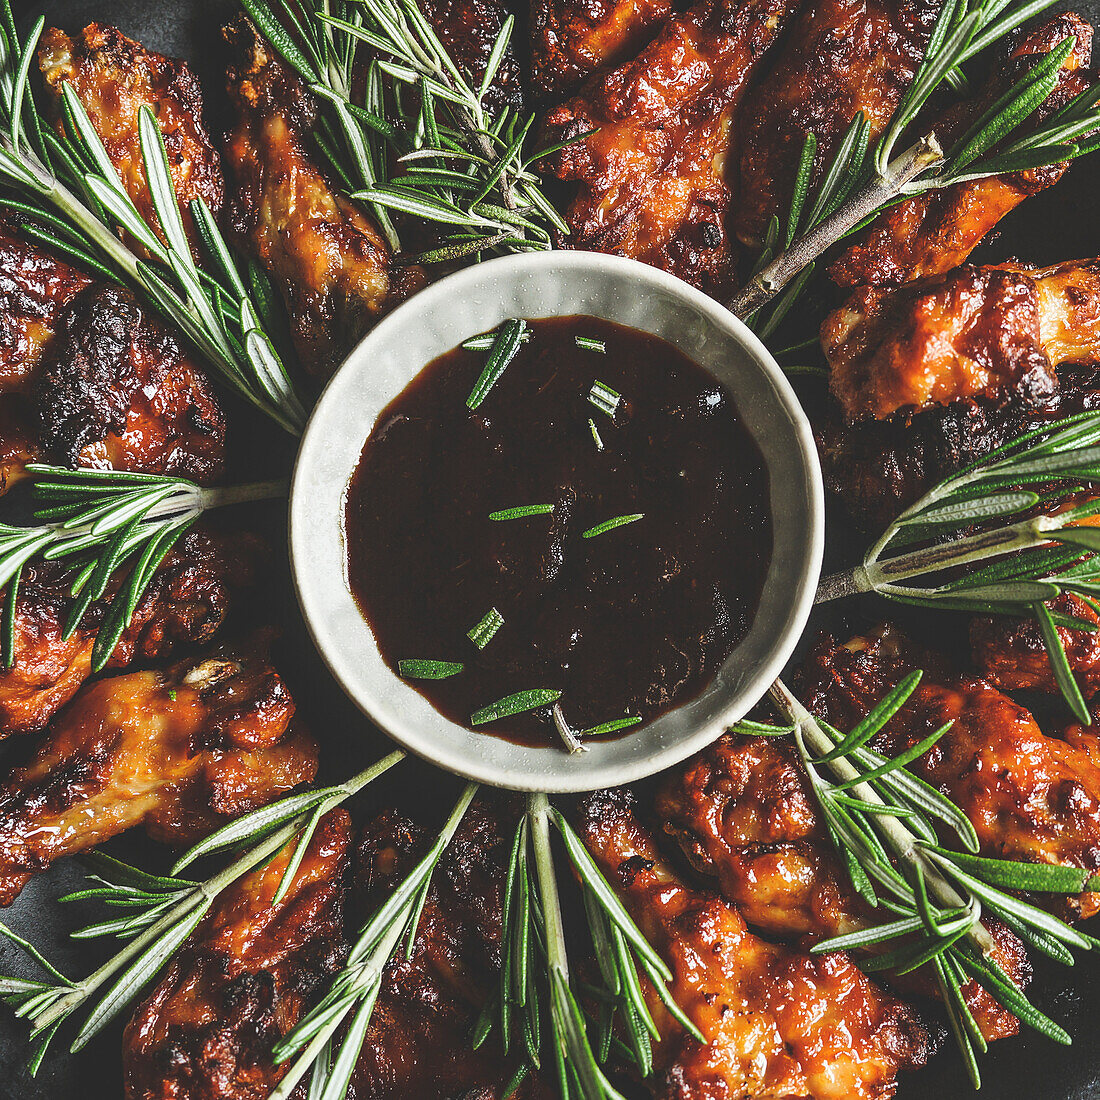 Close up of BBQ chicken wings with rosemary and homemade sauce. Cooking at home with marinated meat. Delicious finger food. Top view.